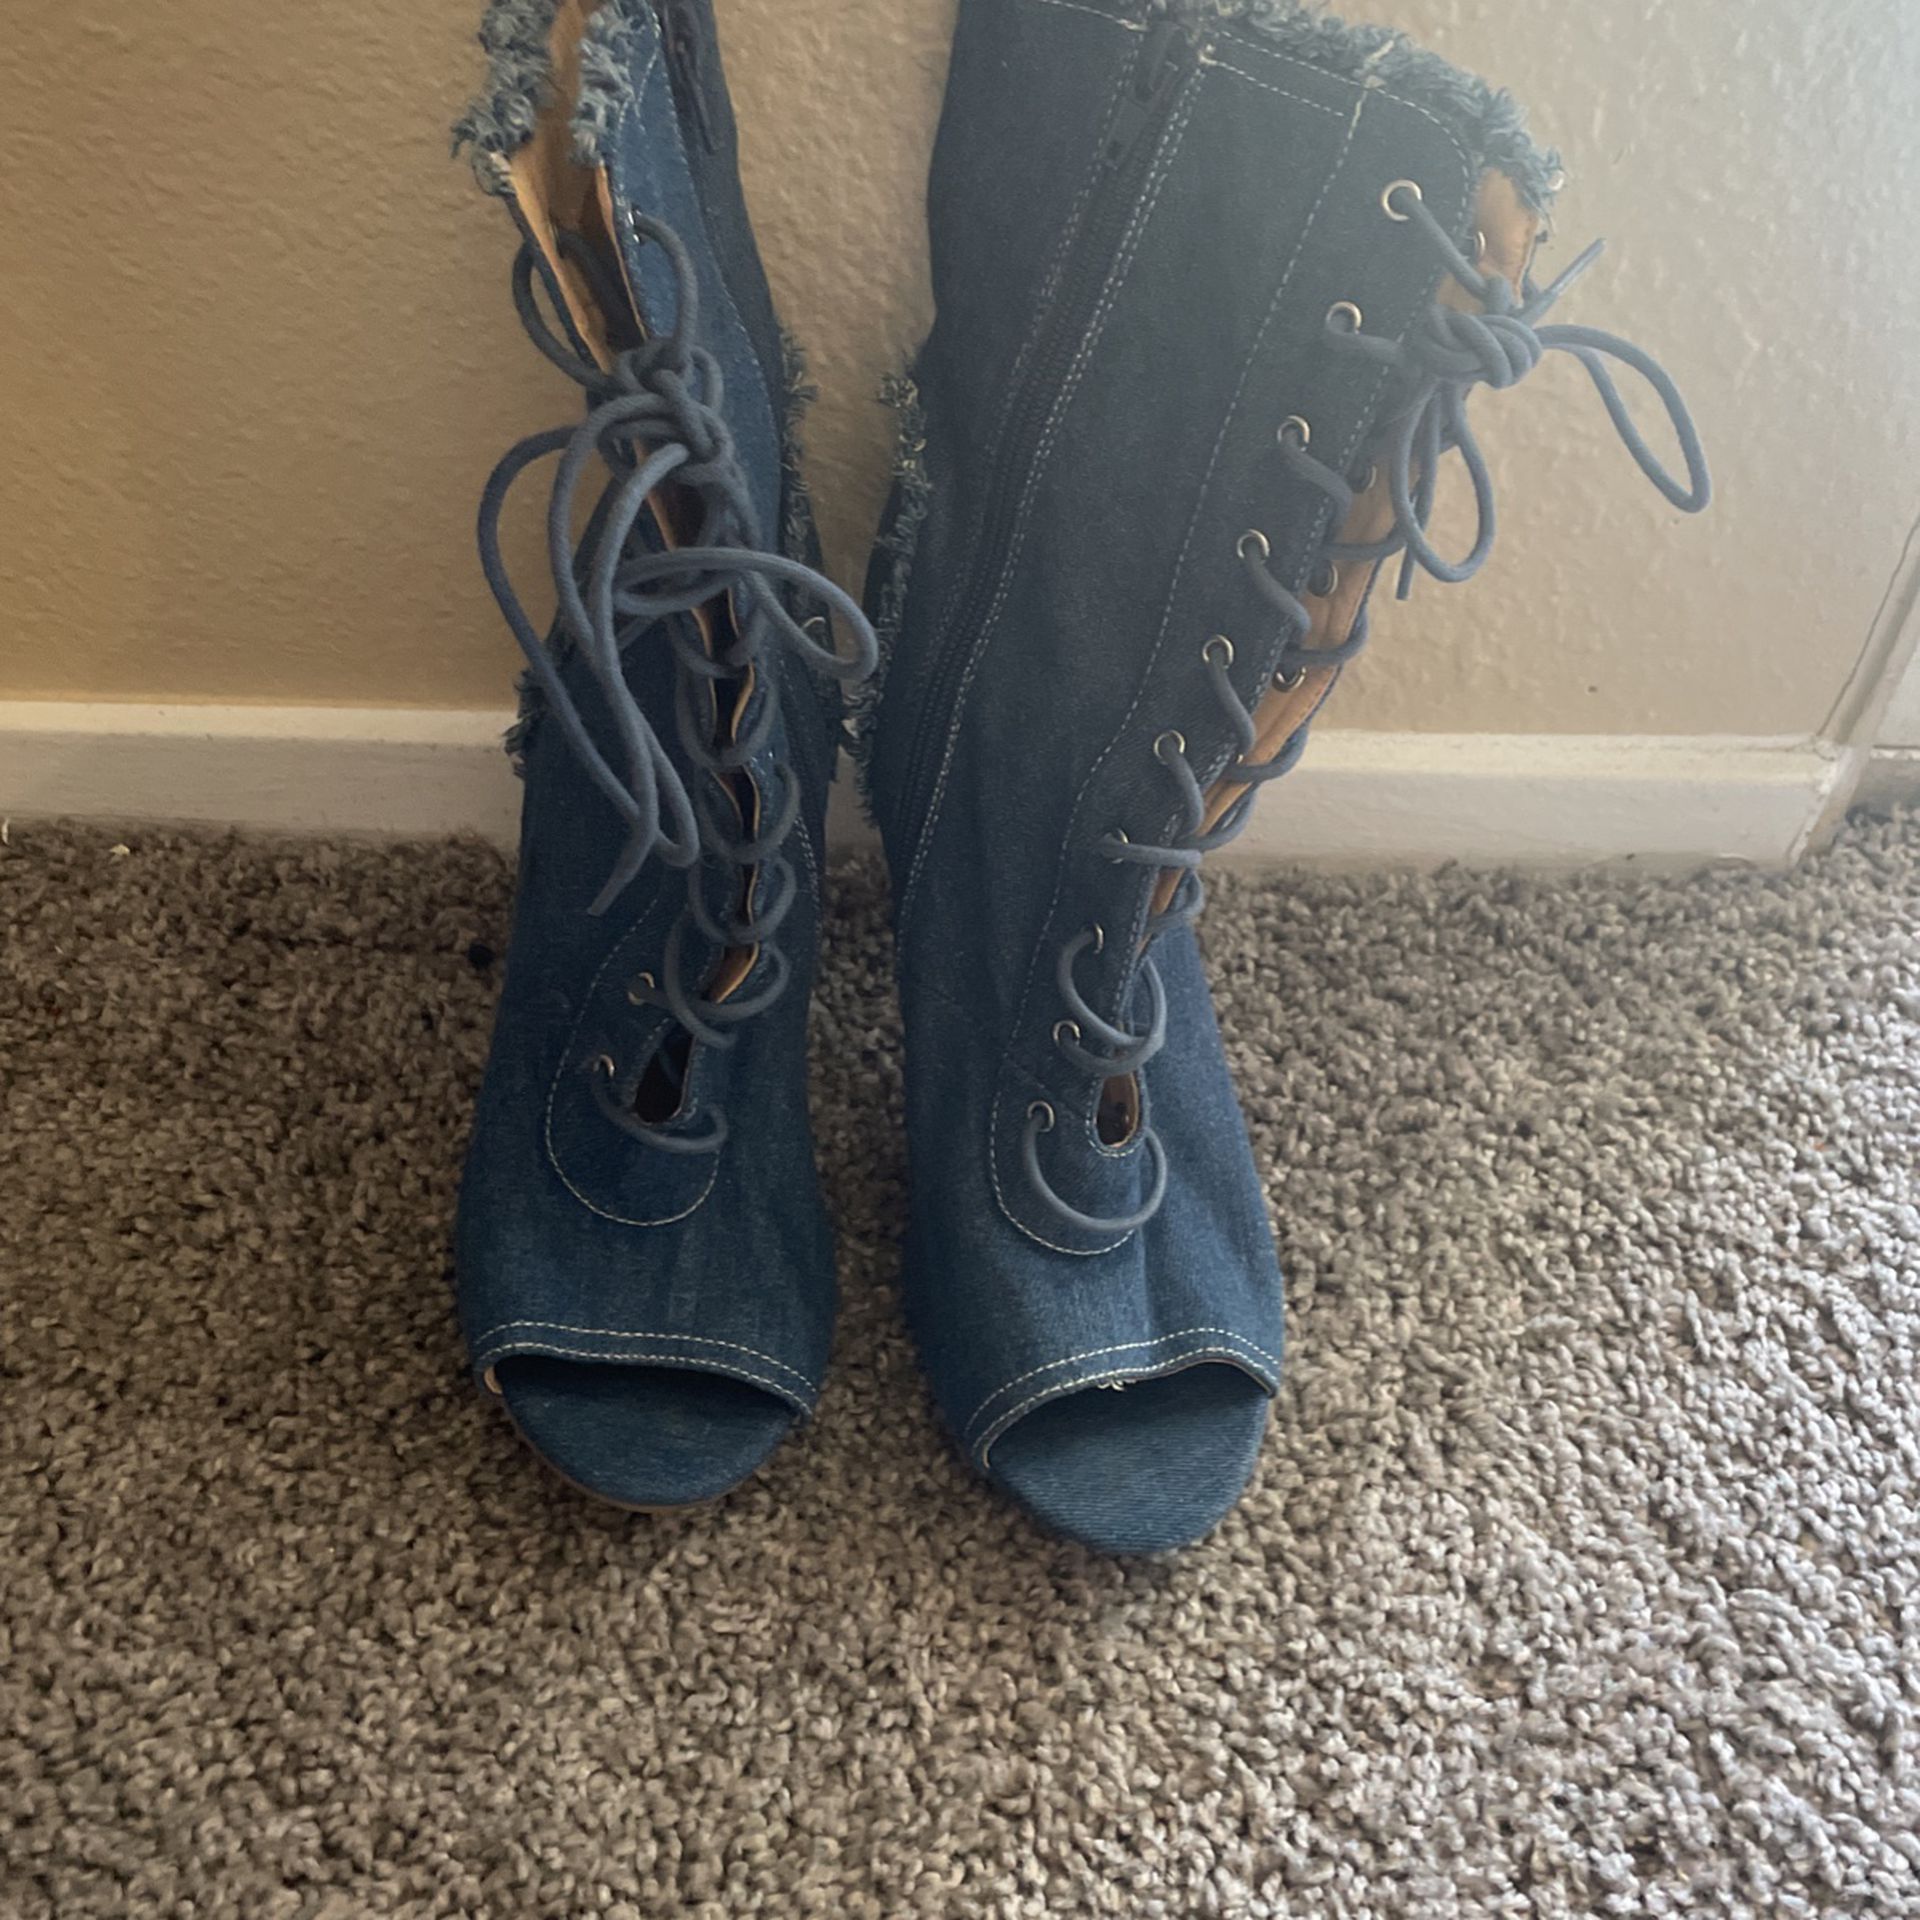 Jean Boots Size 9